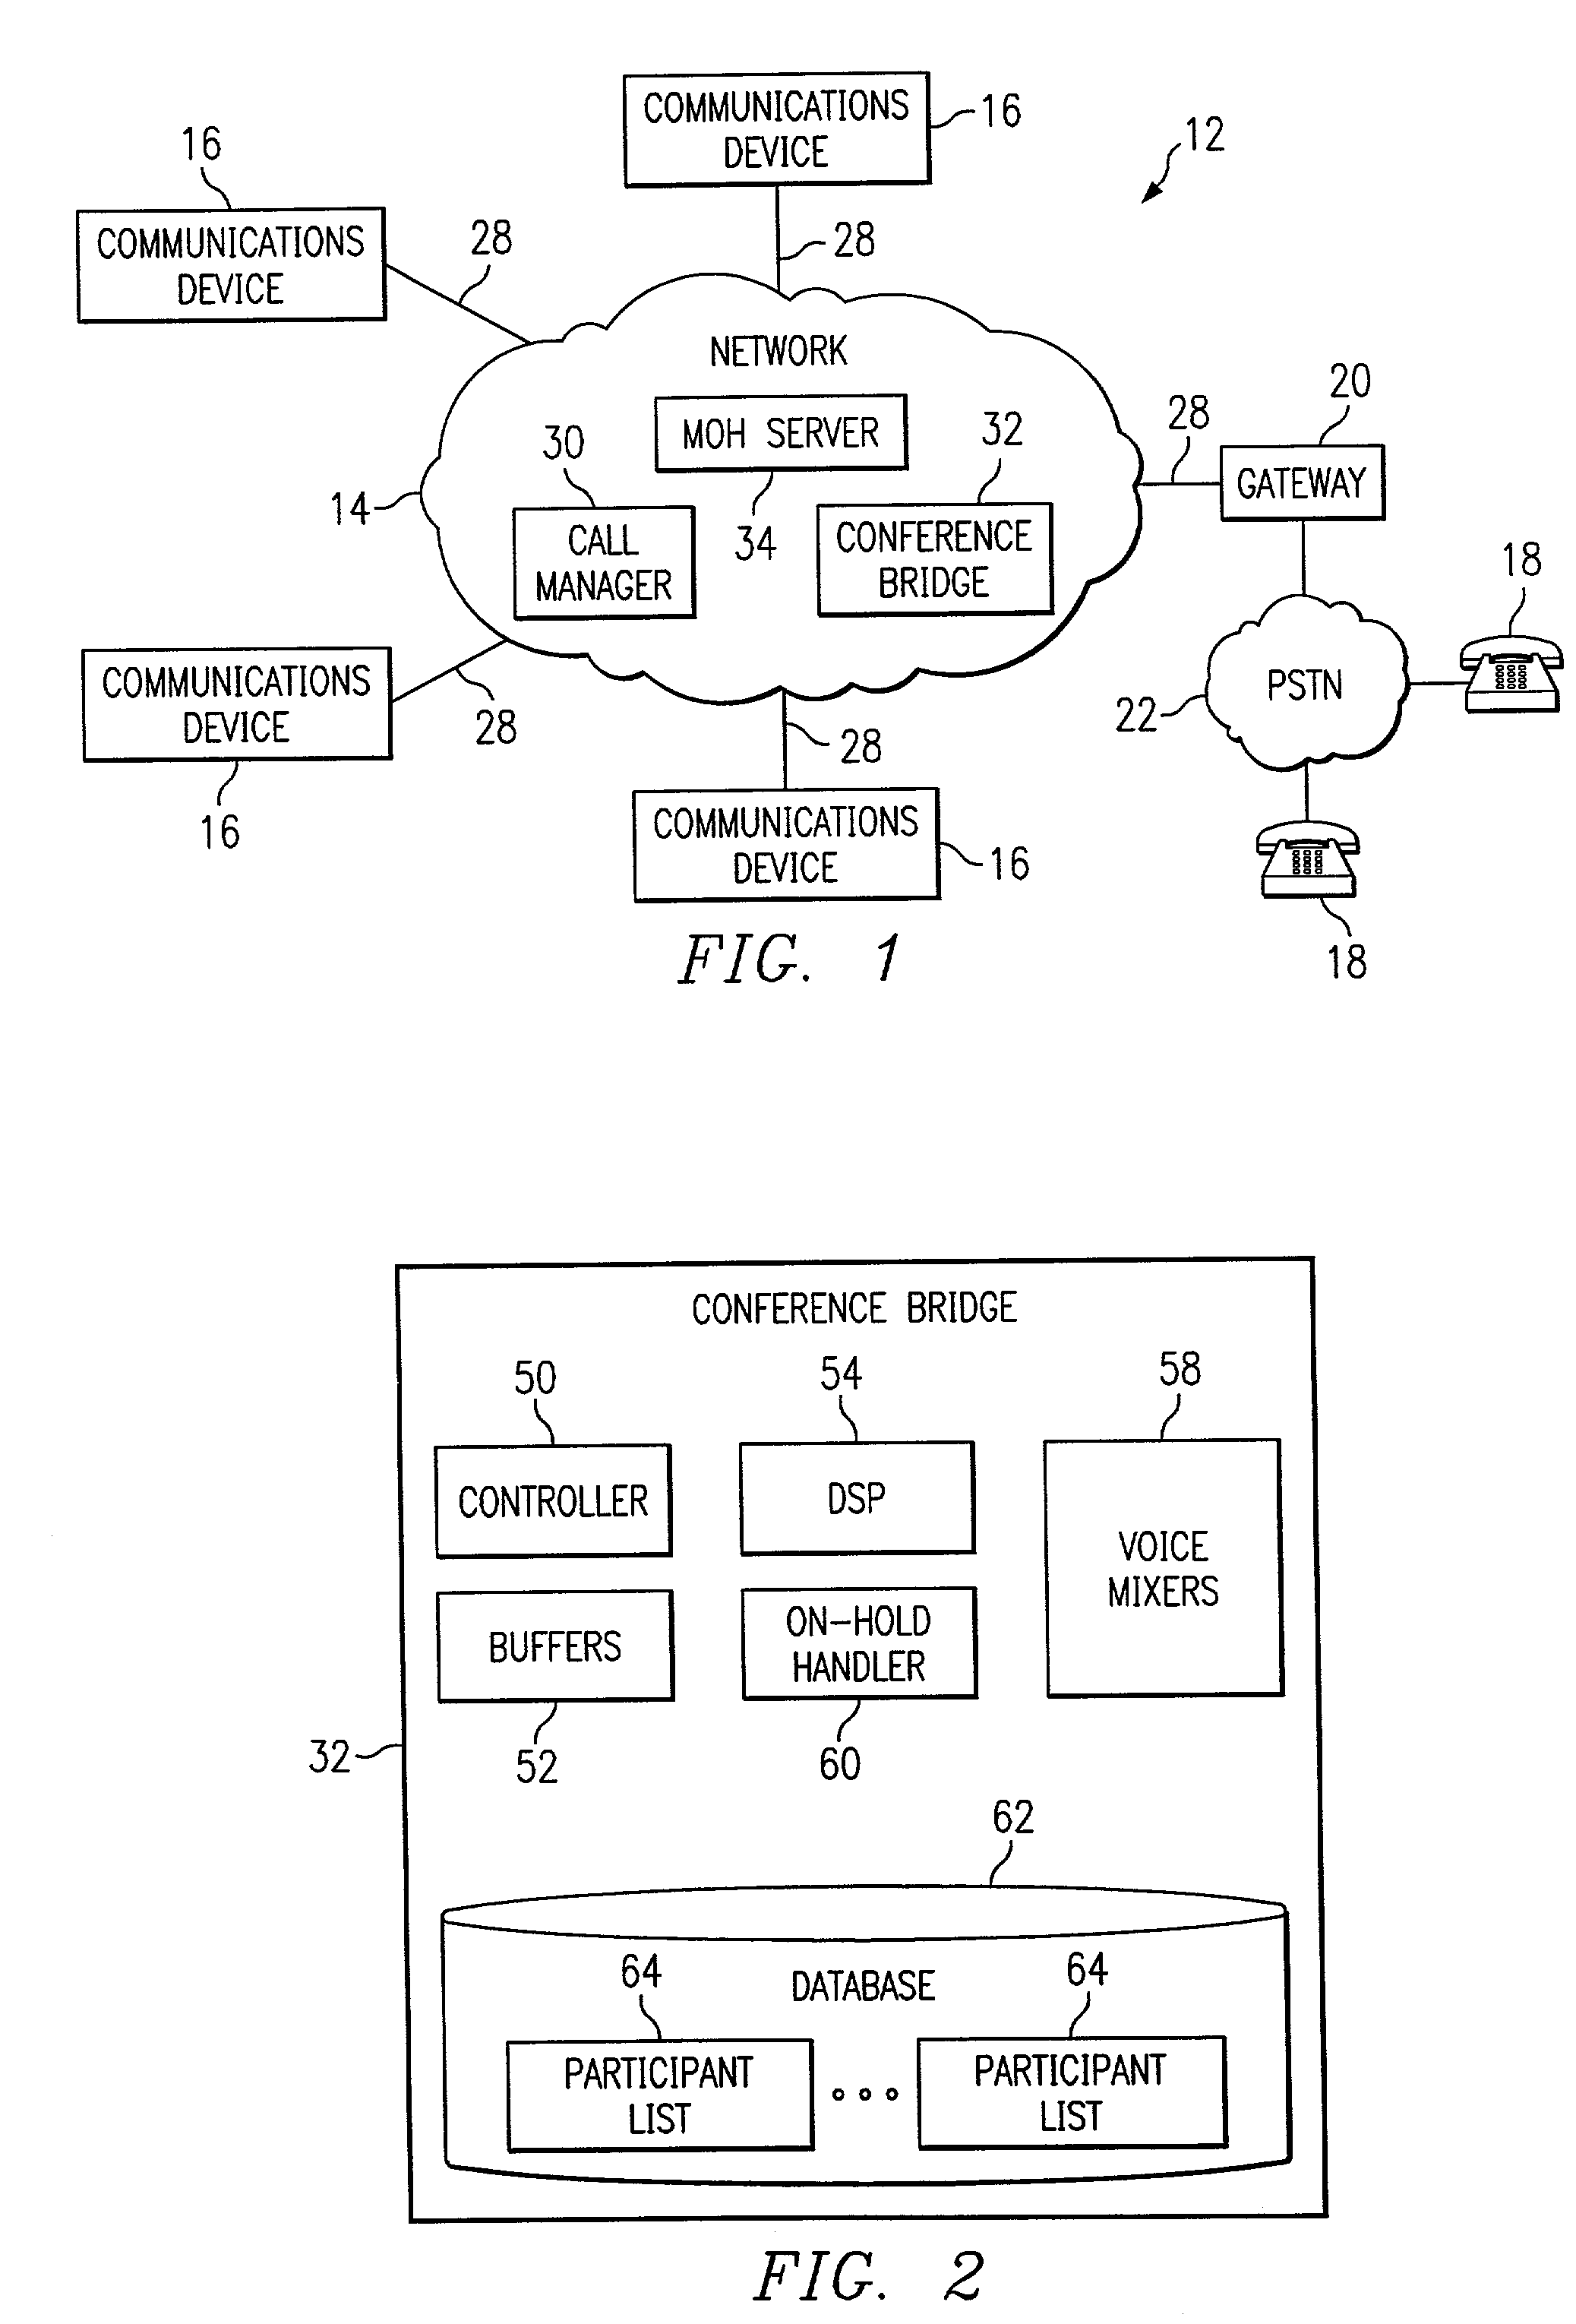 Method and system for controlling audio content during multiparty communication sessions